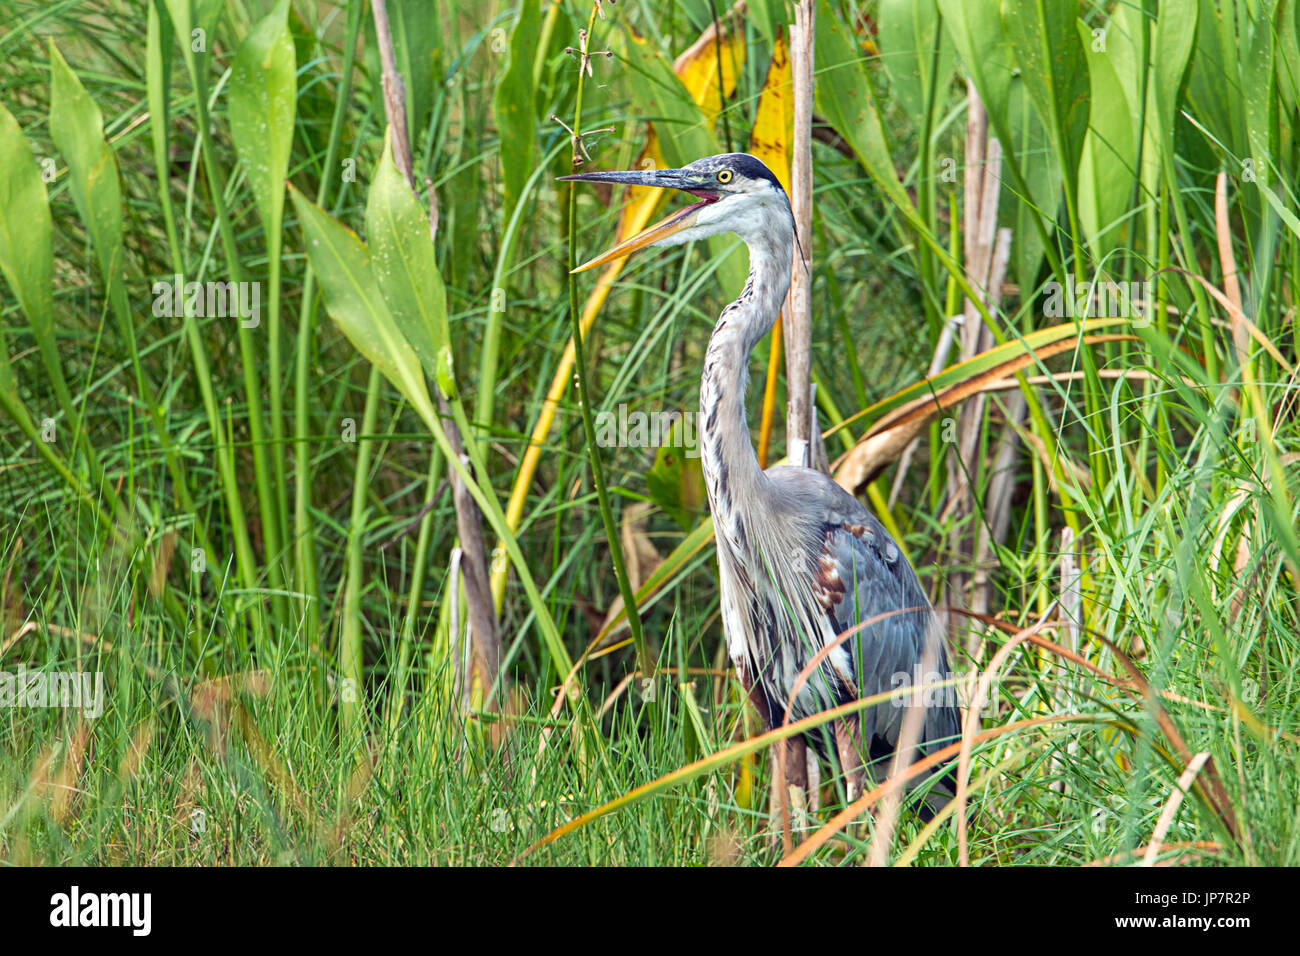 A great blue heron stands in a marshy area with tall grass at Woodruff wildlife preserve in Florida. Stock Photo